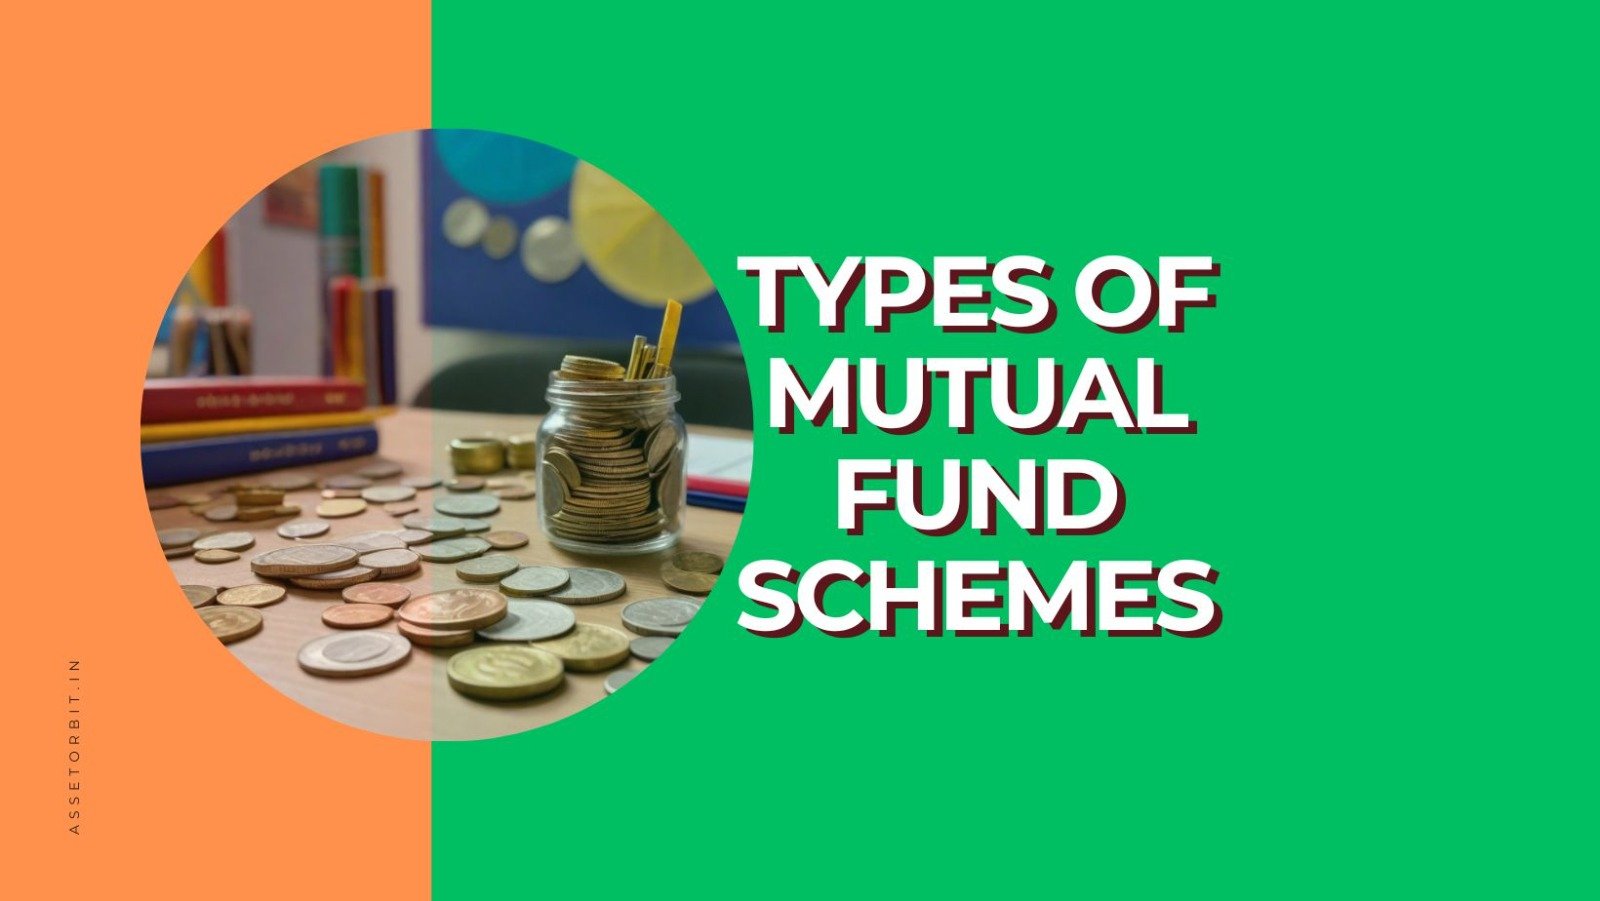 Different Types of Mutual Fund Schemes and Benefits